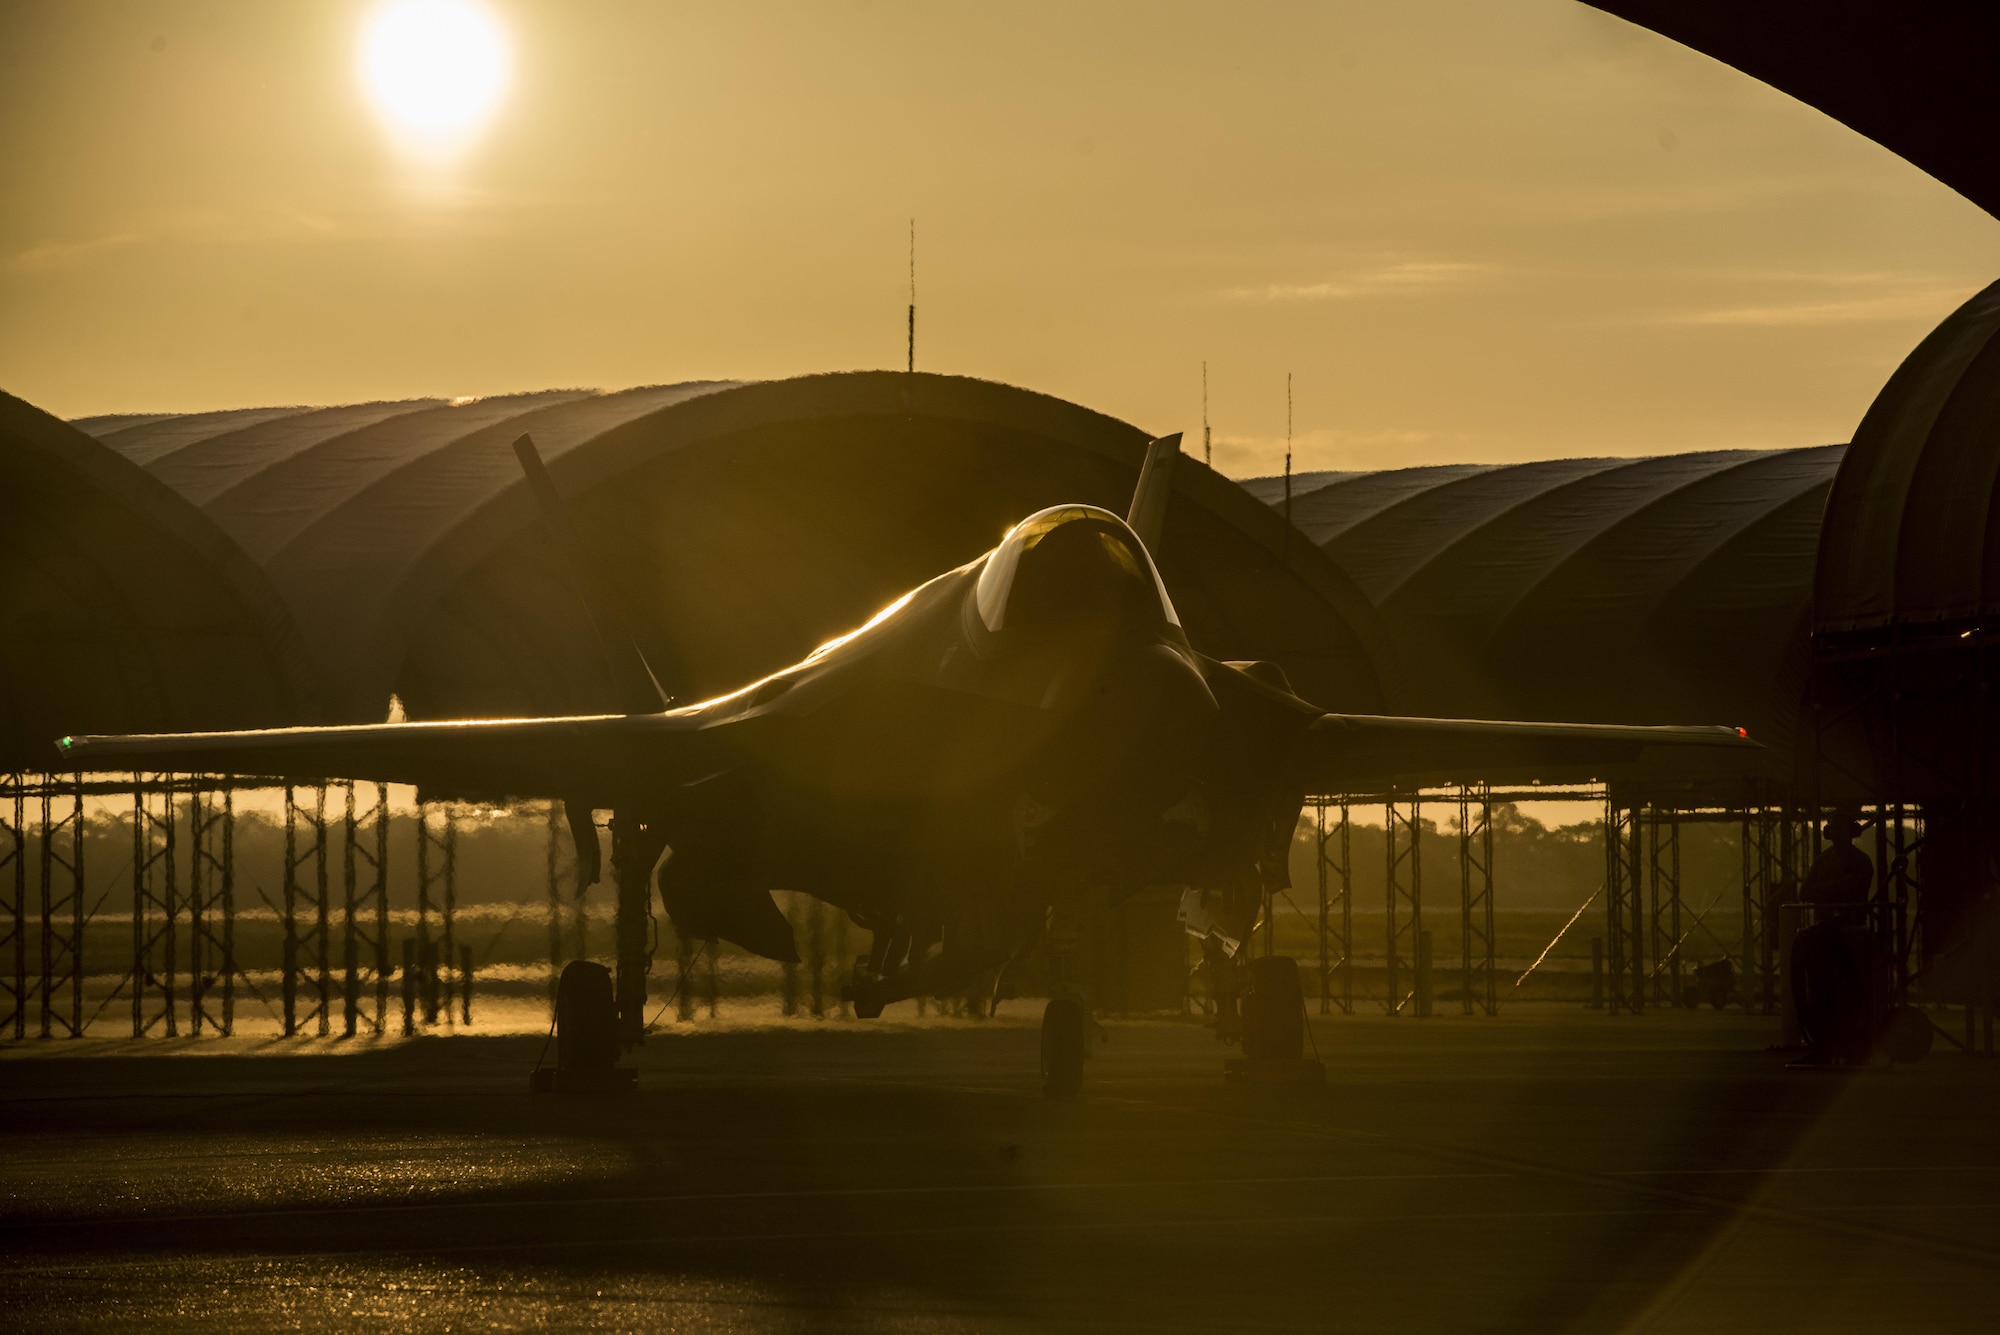 The sun rises behind an F-35A Lightning II Aug. 2, 2016, at Eglin Air Force Base, Fla. The F-35A is the latest deployable fifth-generation aircraft capable of providing air superiority, interdiction, suppression of enemy air defenses and close air support, as well as great command and control functions through fused sensors, and will provide pilots with unprecedented situational awareness of the battlespace. (U.S. Air Force photo/Senior Airman Stormy Archer)